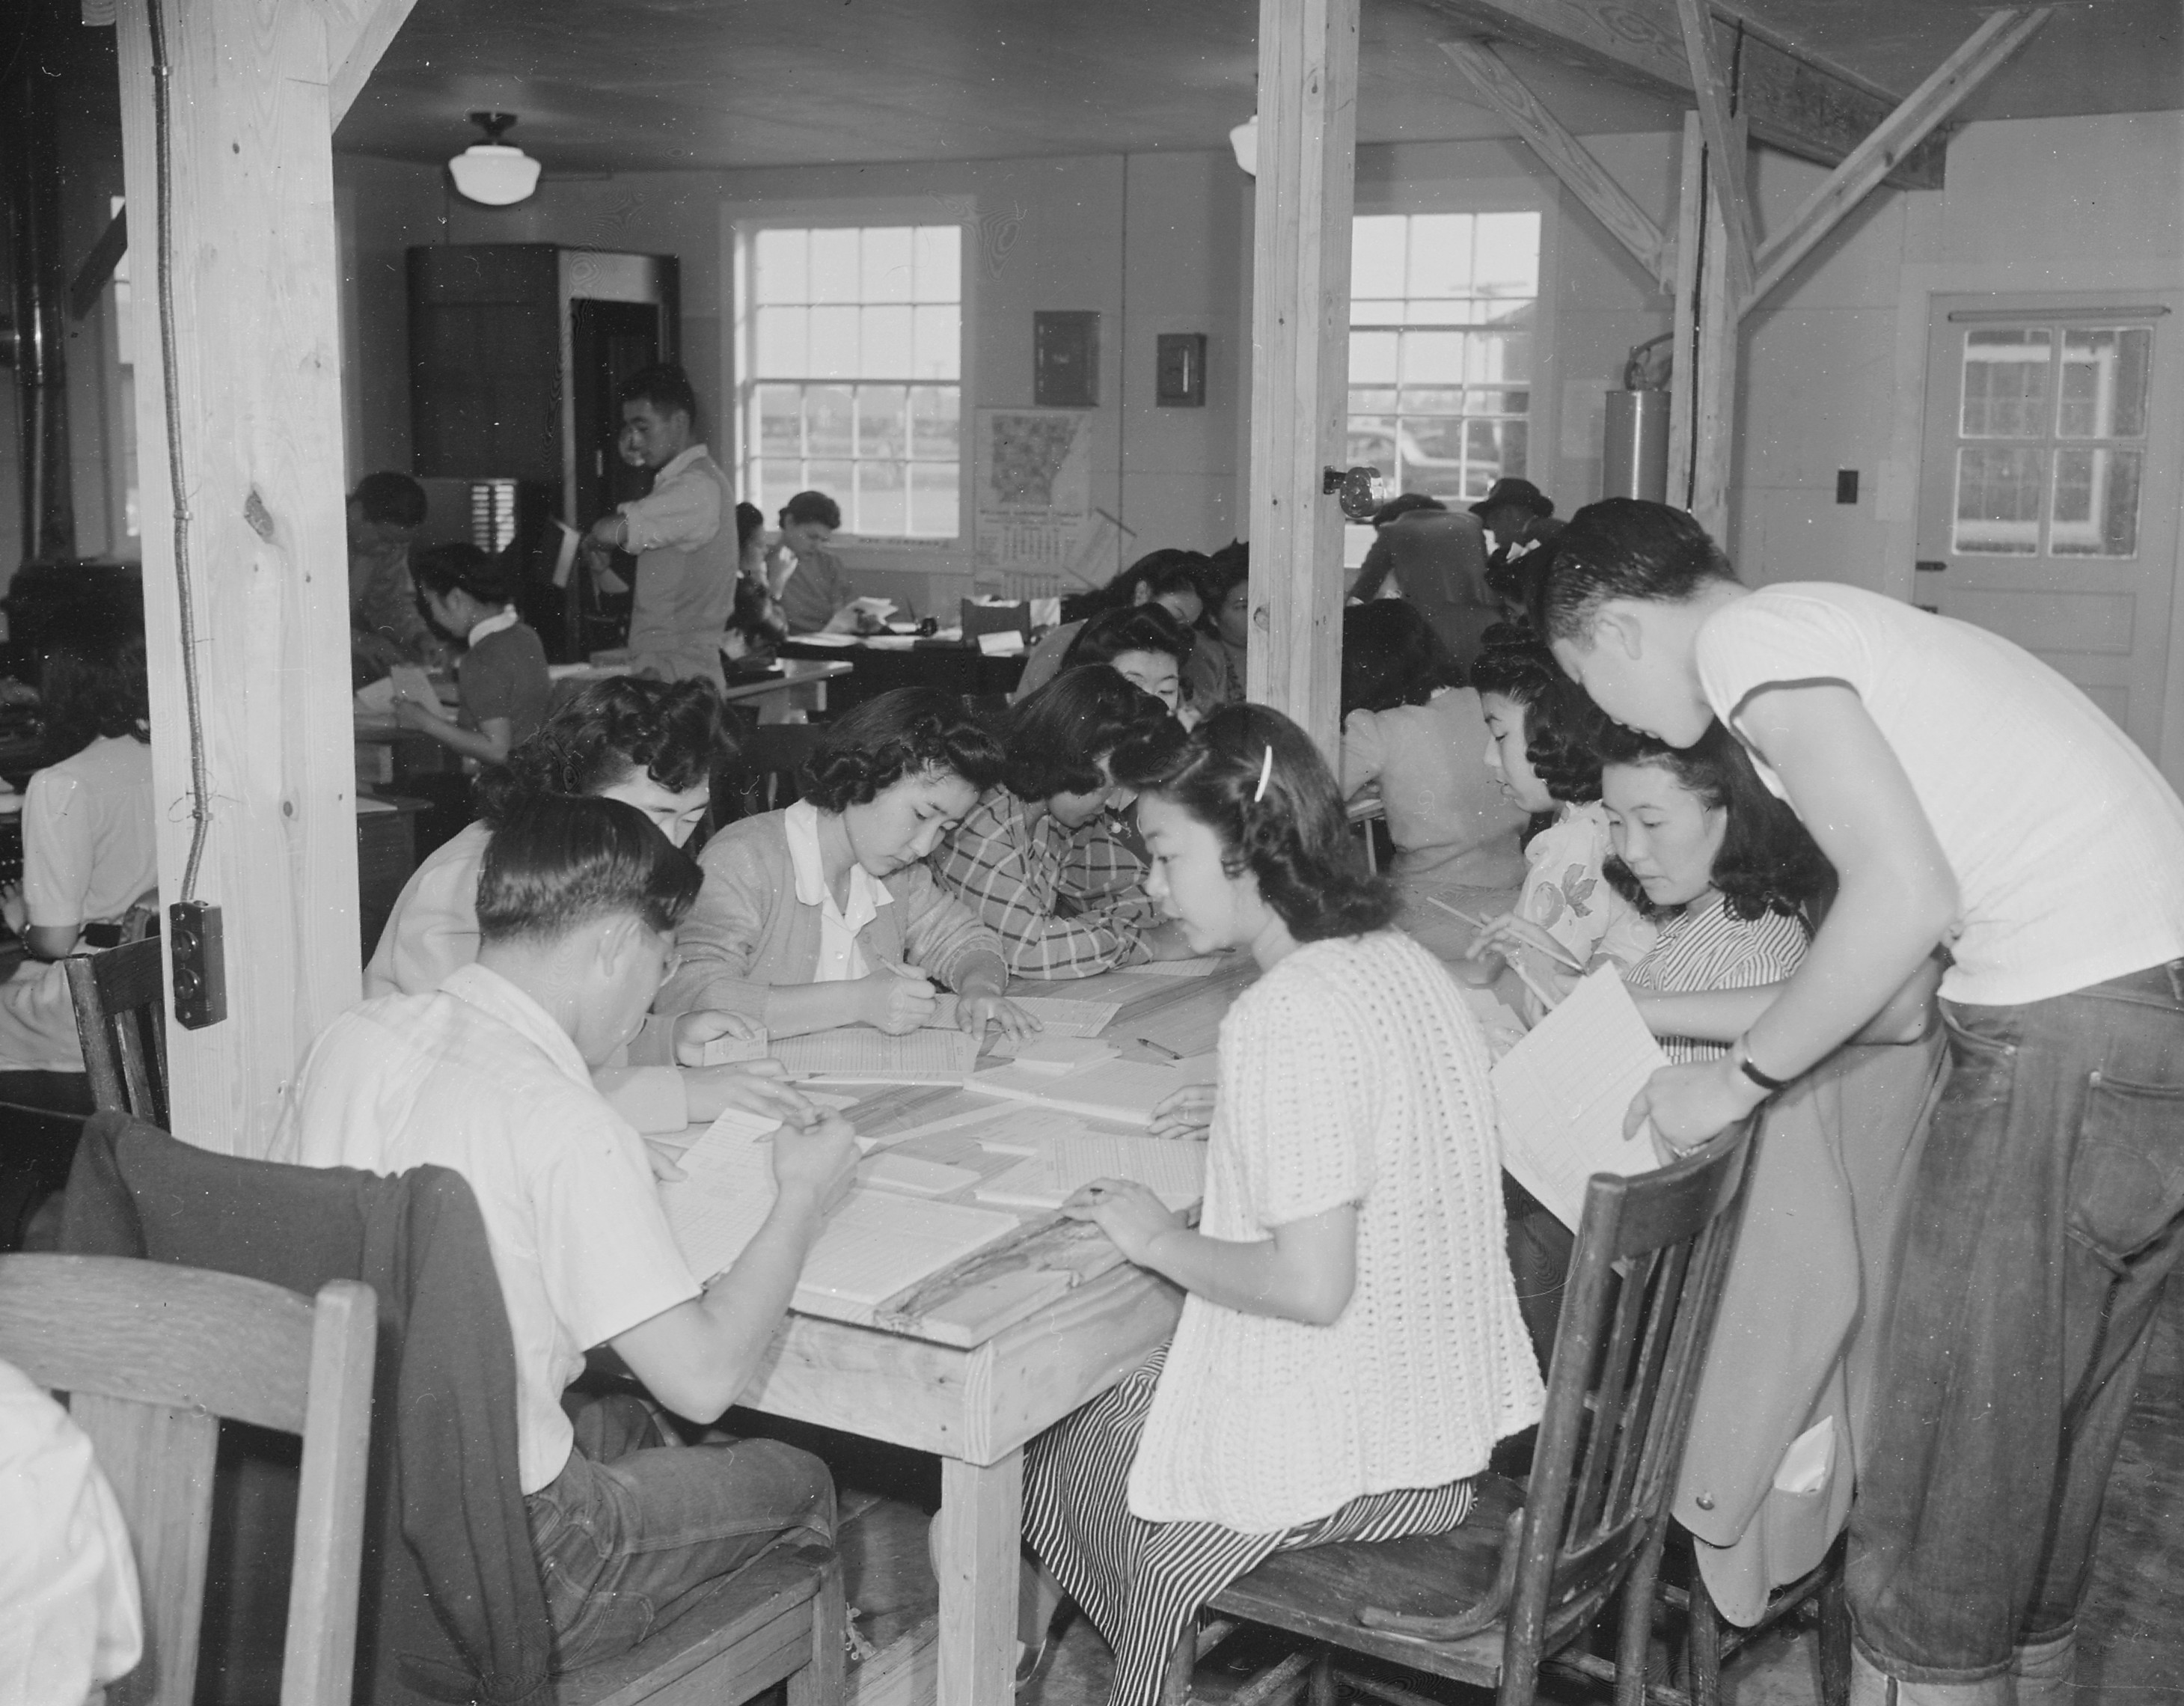 Workers at the Welfare Department of Jerome War Relocation Center, Arkansas, United States, 18 Nov 1942